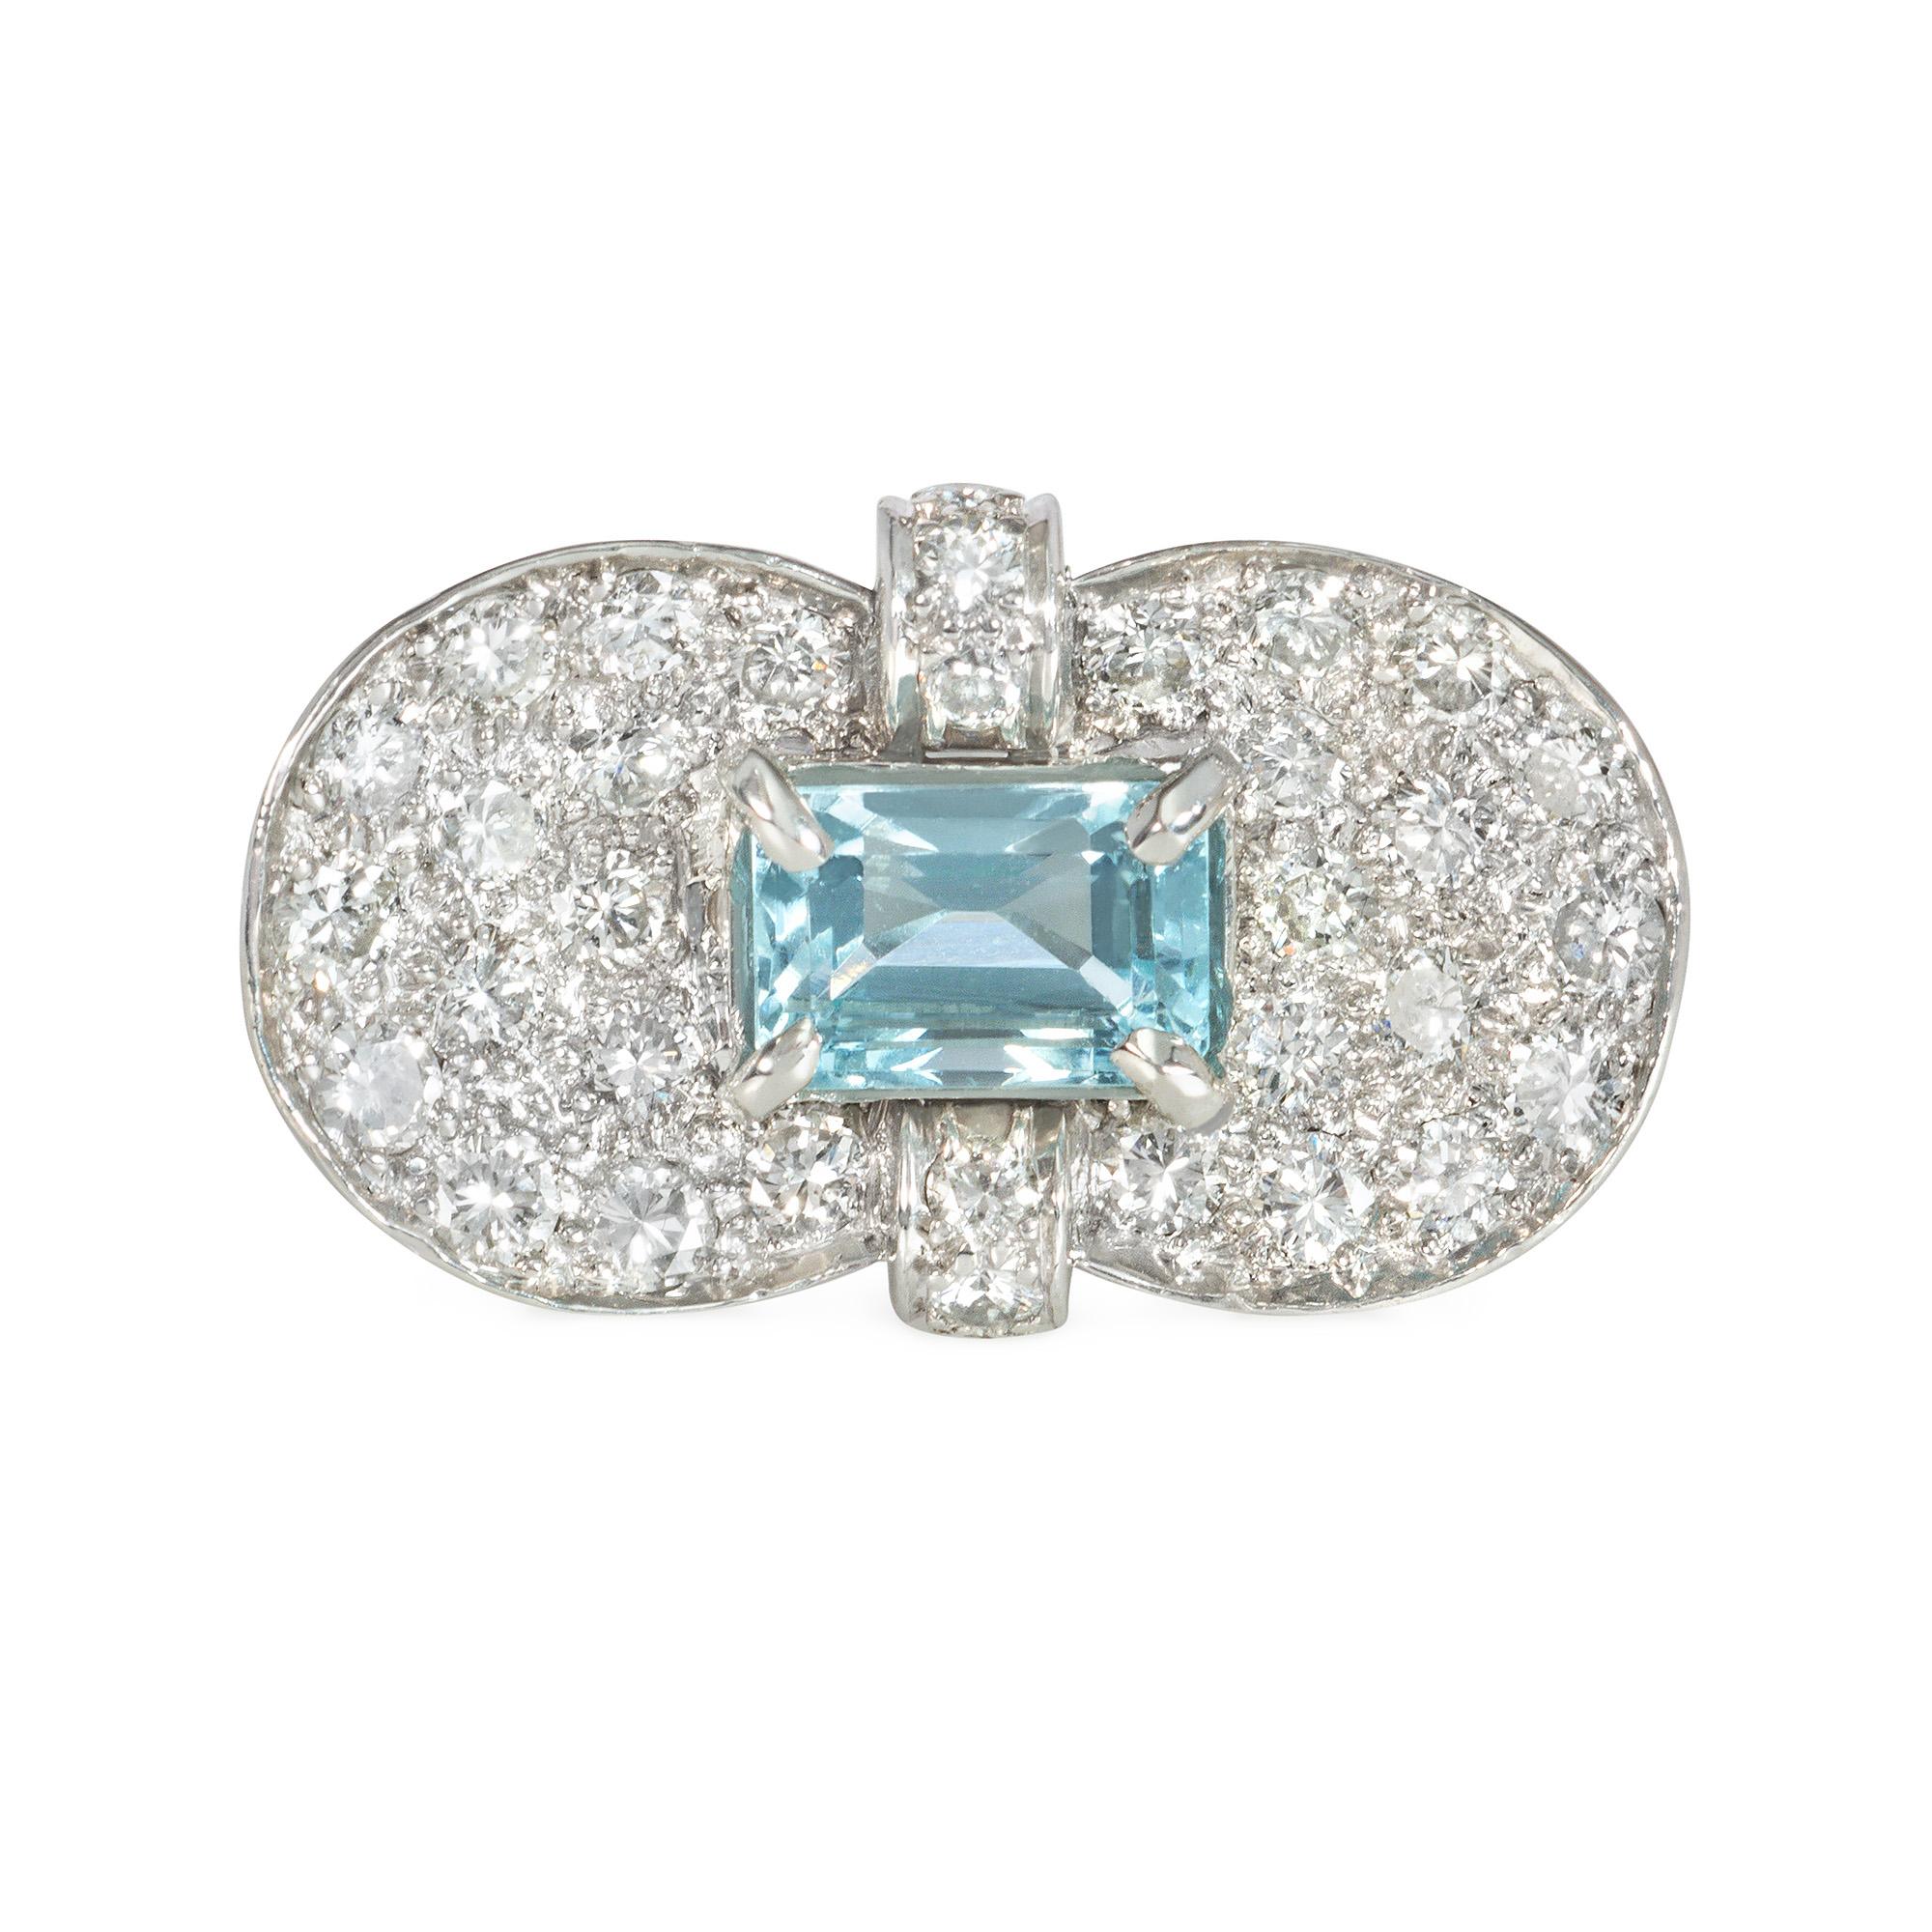 A Retro diamond and aquamarine ring designed as a concave pavé diamond girdled panel set with a central emerald-cut aquamarine, in platinum.  Numbered 1105.  Atw diamonds 1.60 cts., aquamarine measures approximately 7.5 x 5.5mm.